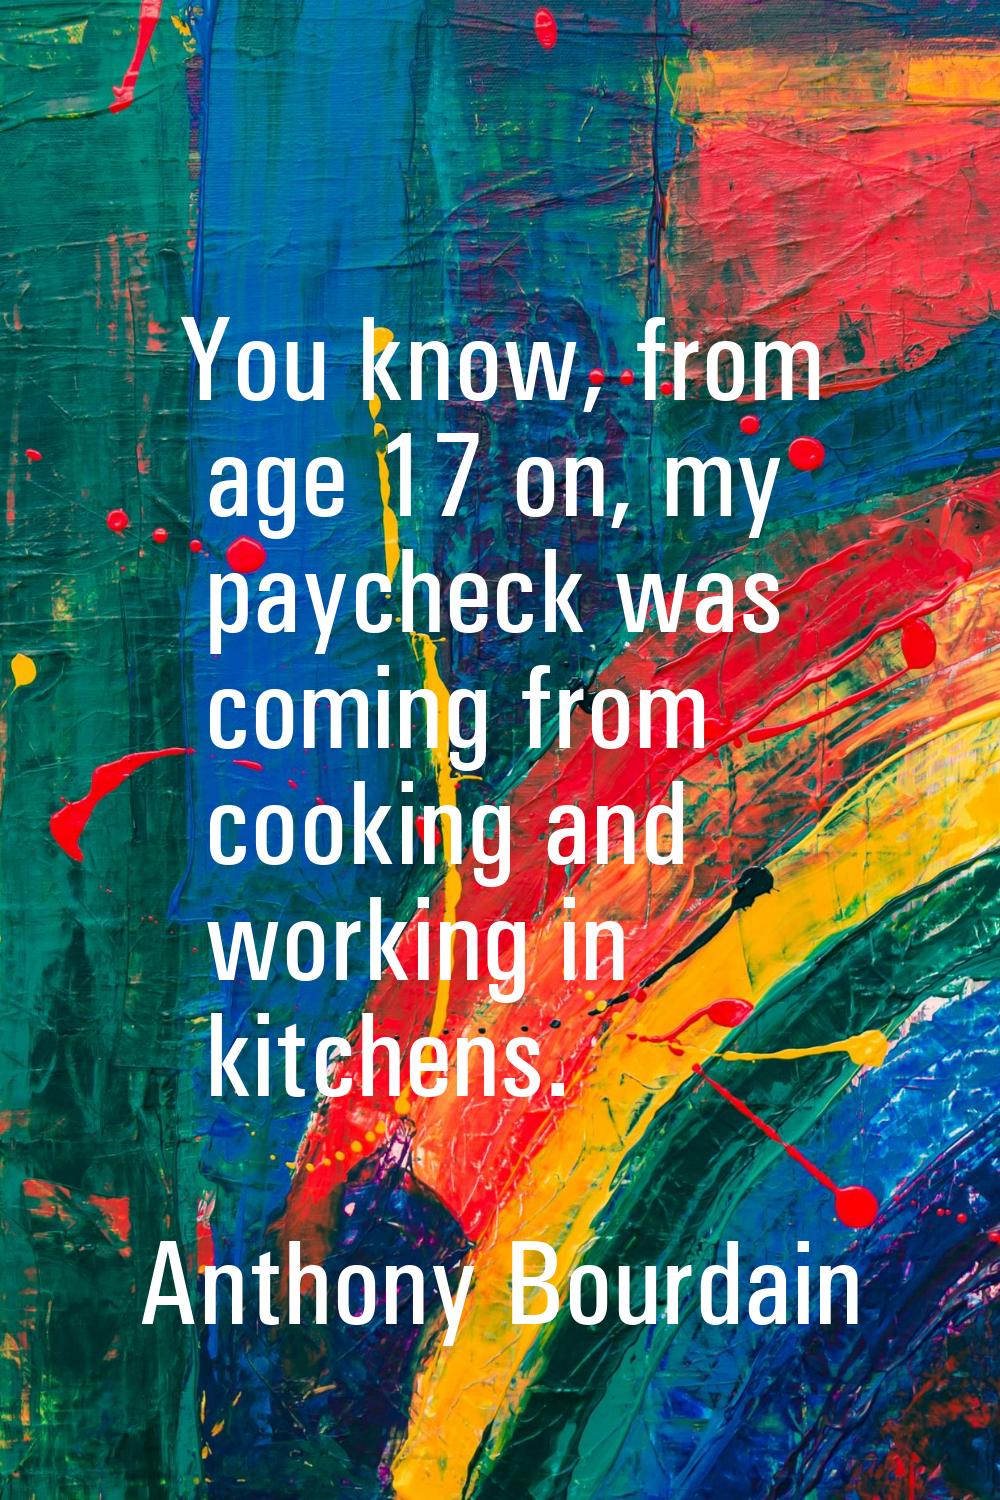 You know, from age 17 on, my paycheck was coming from cooking and working in kitchens.